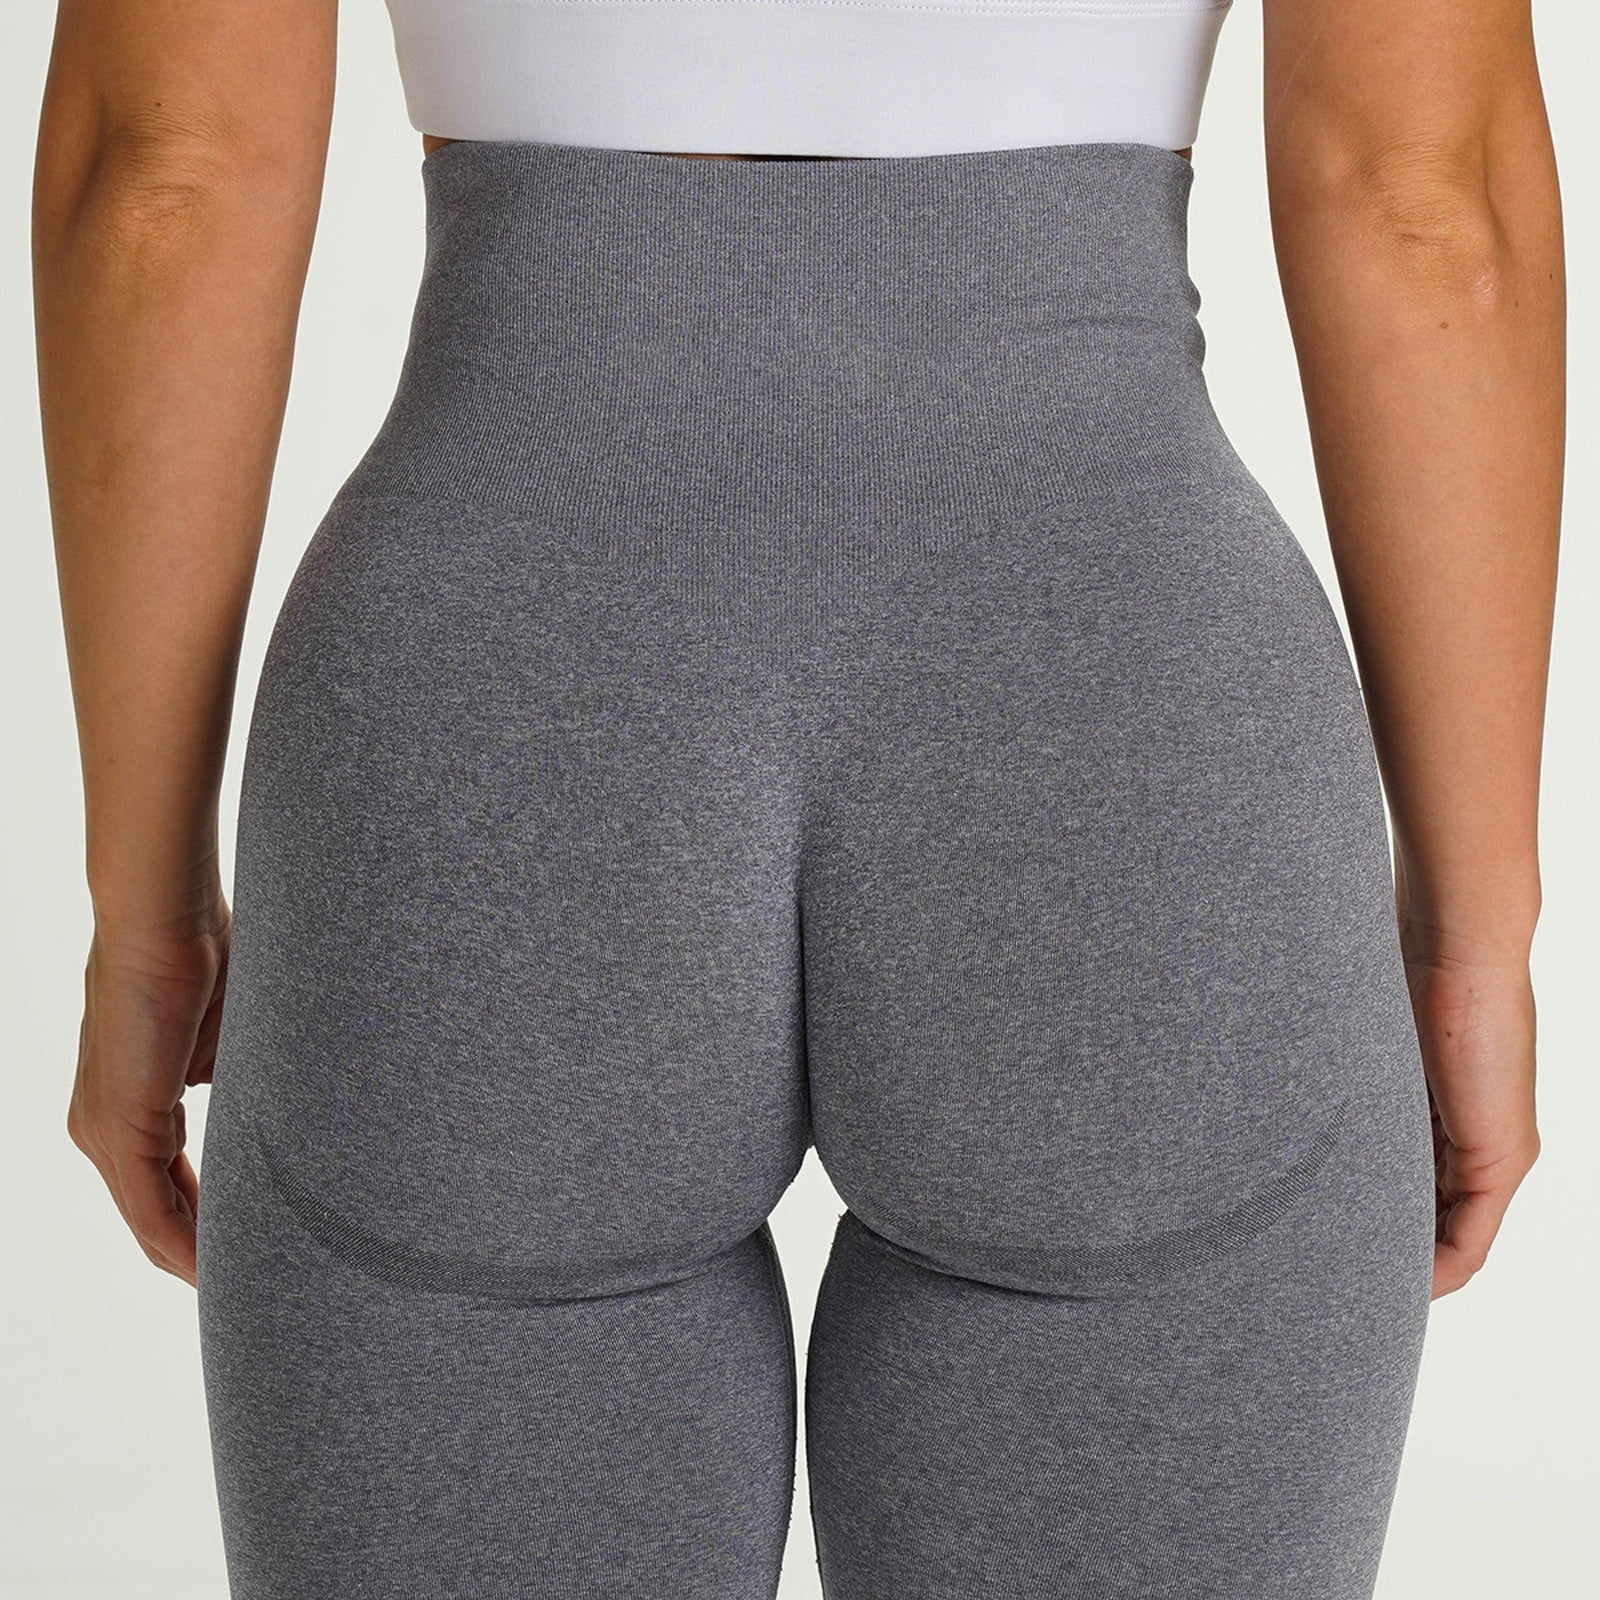 Womens High Yoga Shorts for Women Seamless Tummy Control Athletic Workout Running Shorts with Deep Pockets - Walmart.com